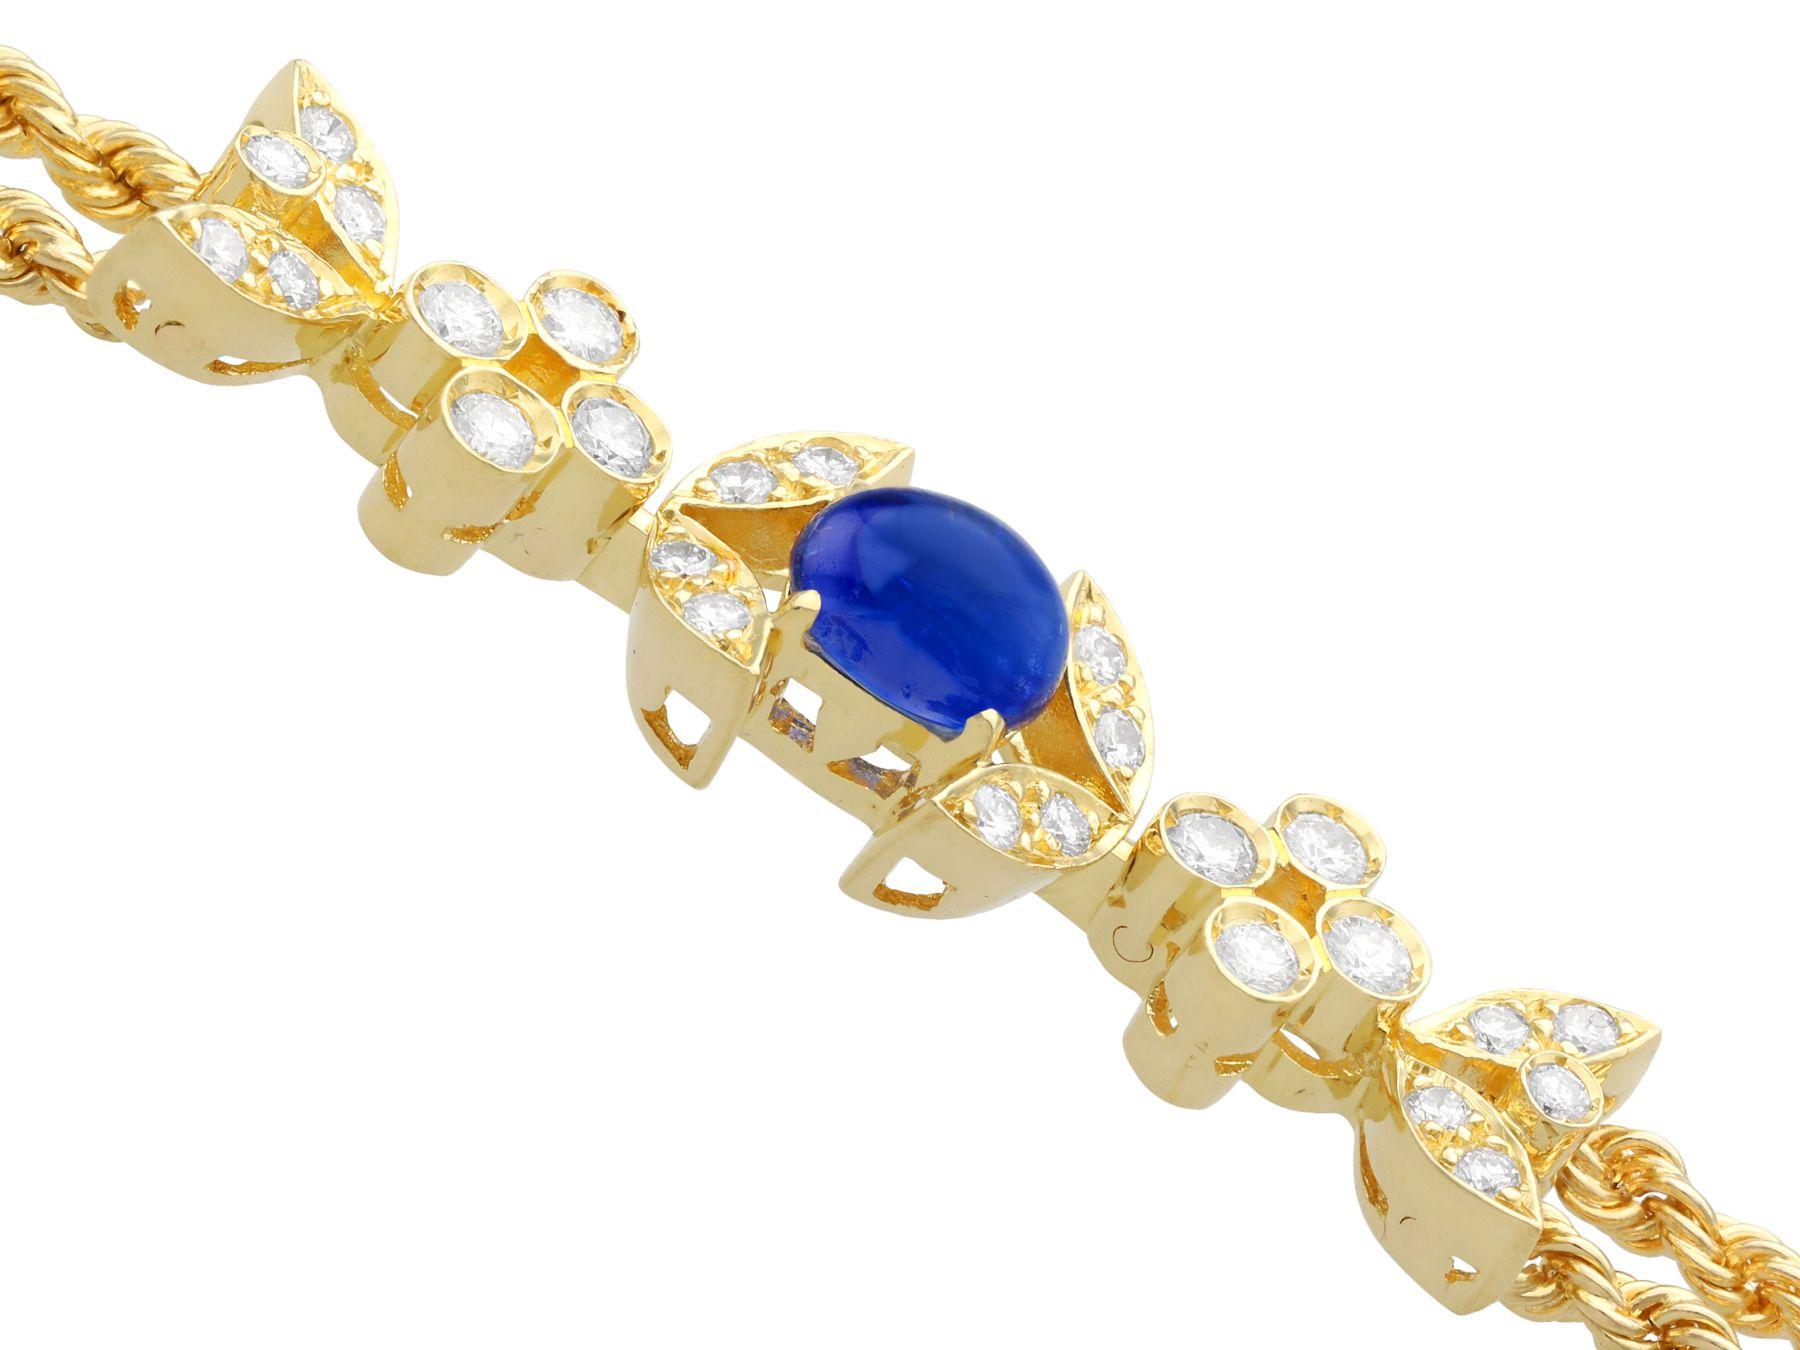 Vintage French 1.30ct Sapphire and Diamond Yellow Gold Bracelet, circa 1940 In Excellent Condition For Sale In Jesmond, Newcastle Upon Tyne